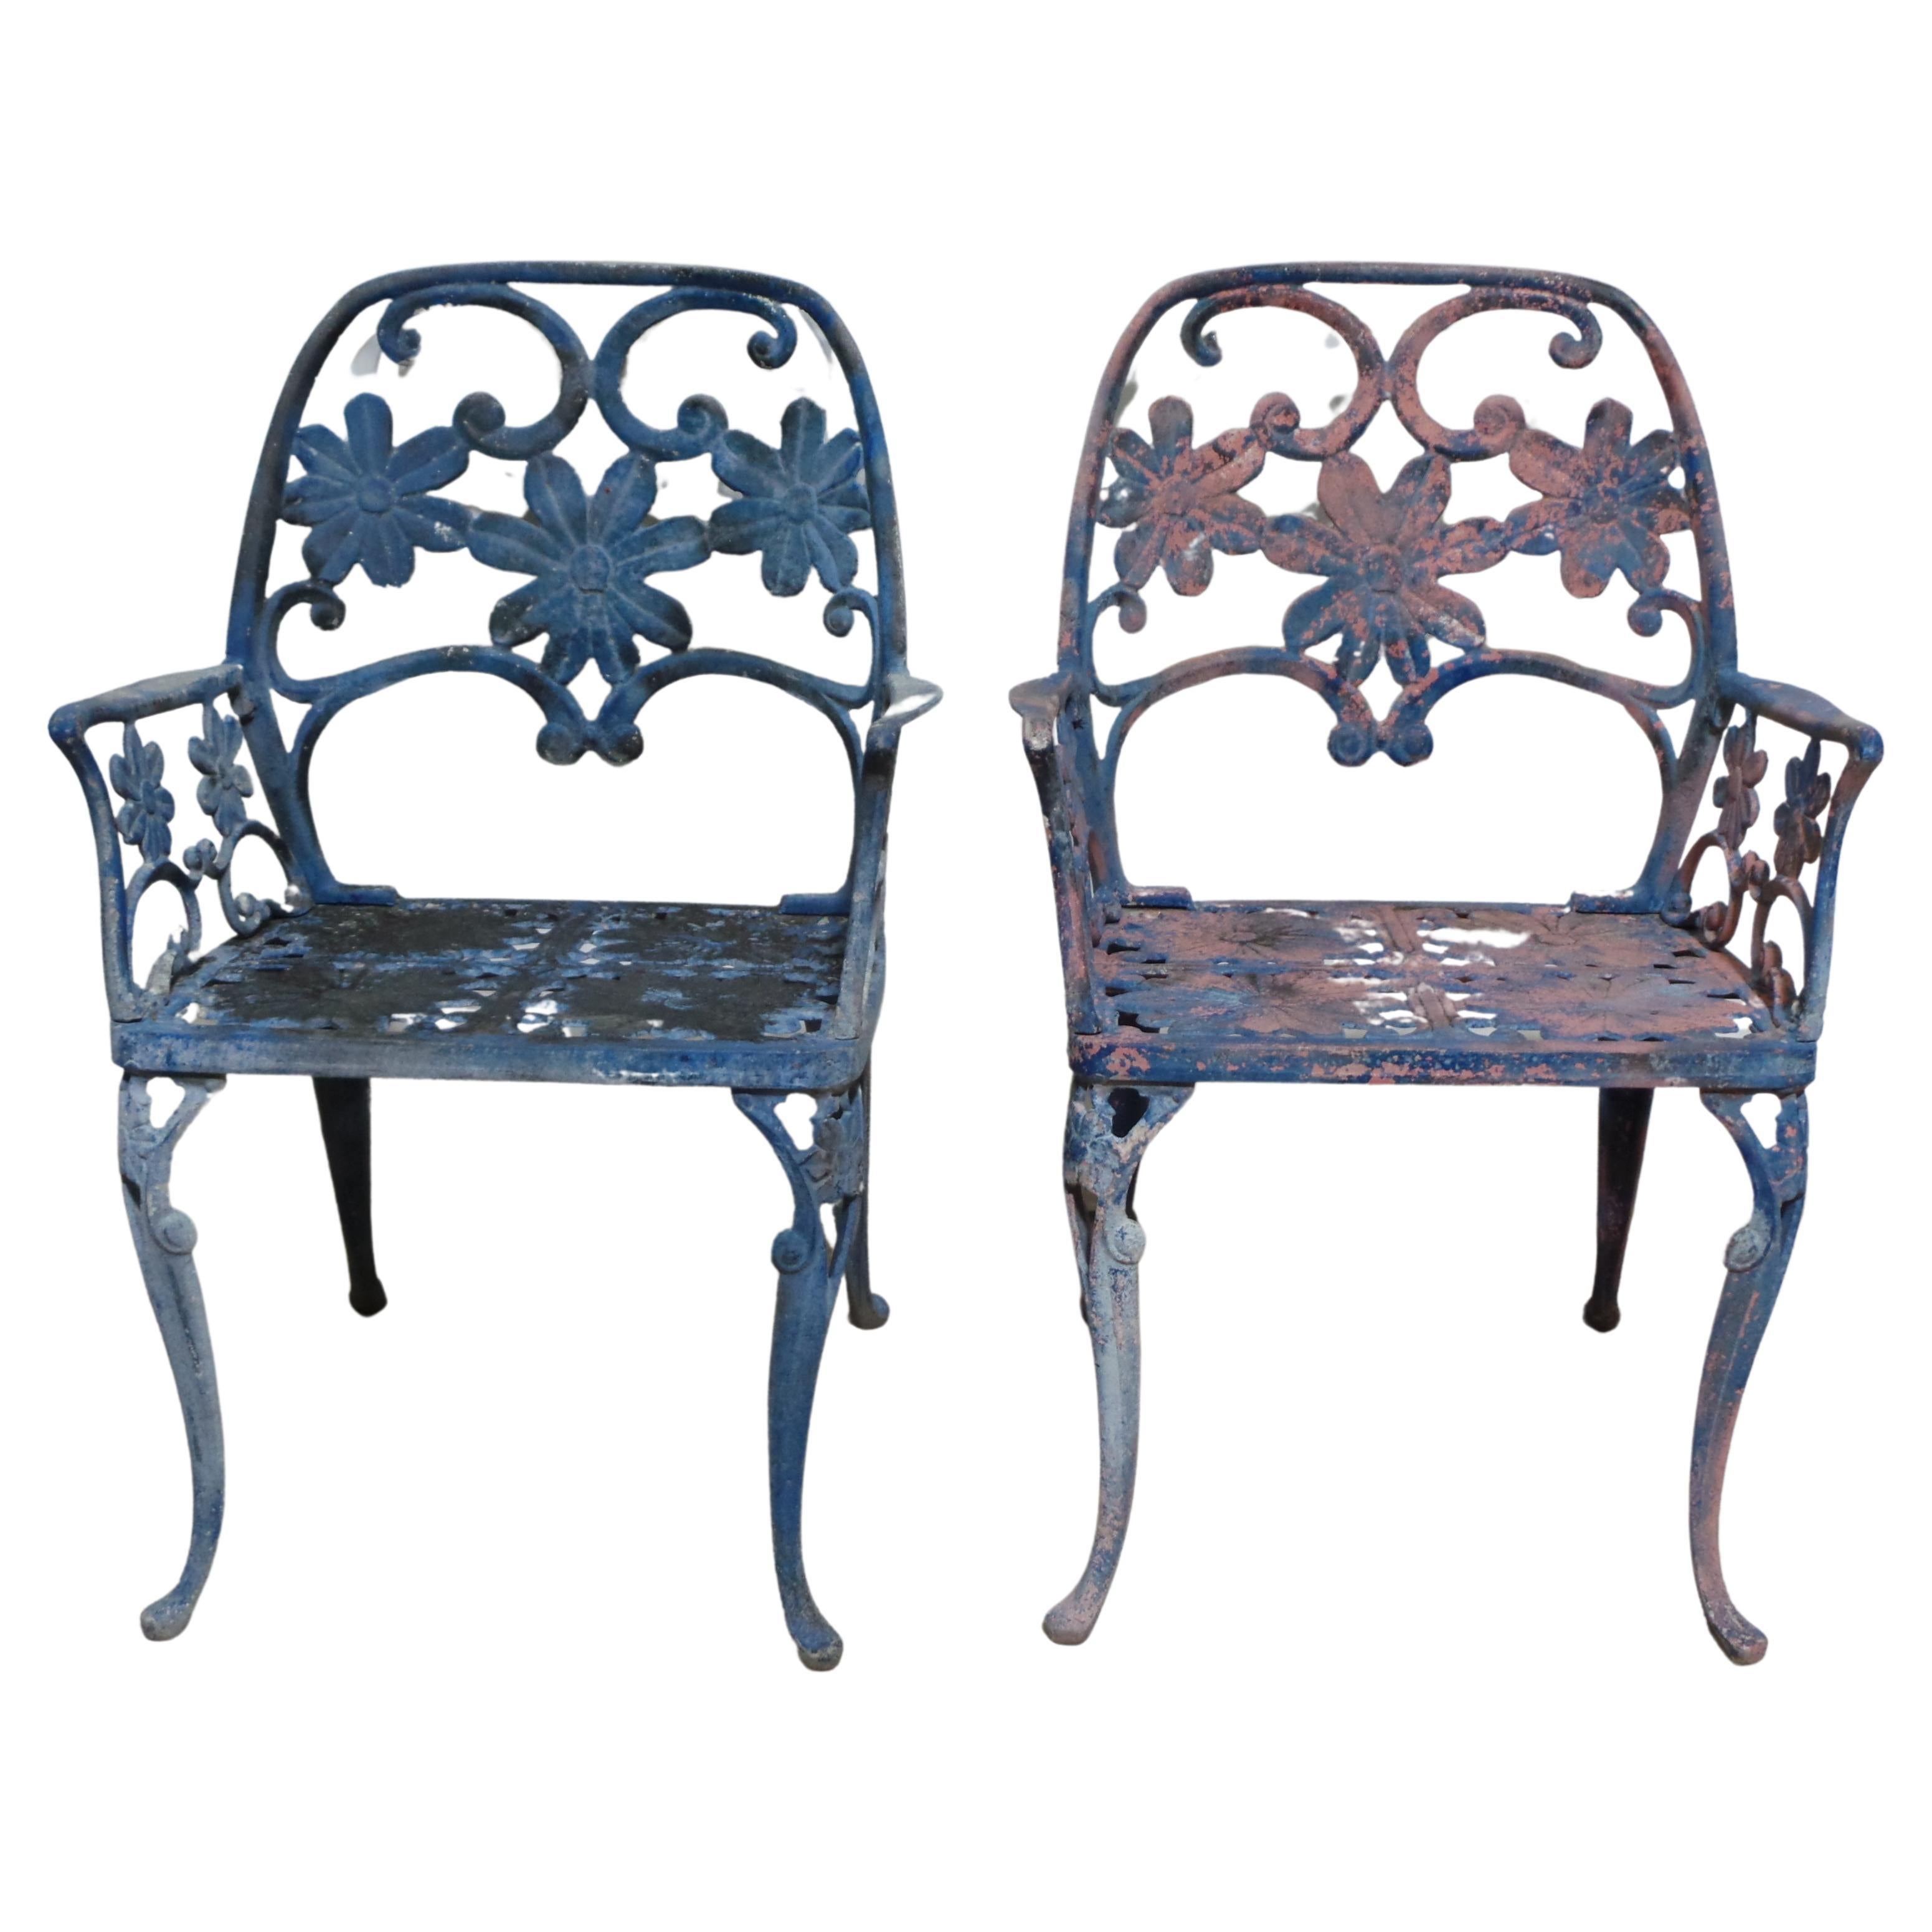 Floral Aluminum Mid Century Style Original Painted Garden Chairs